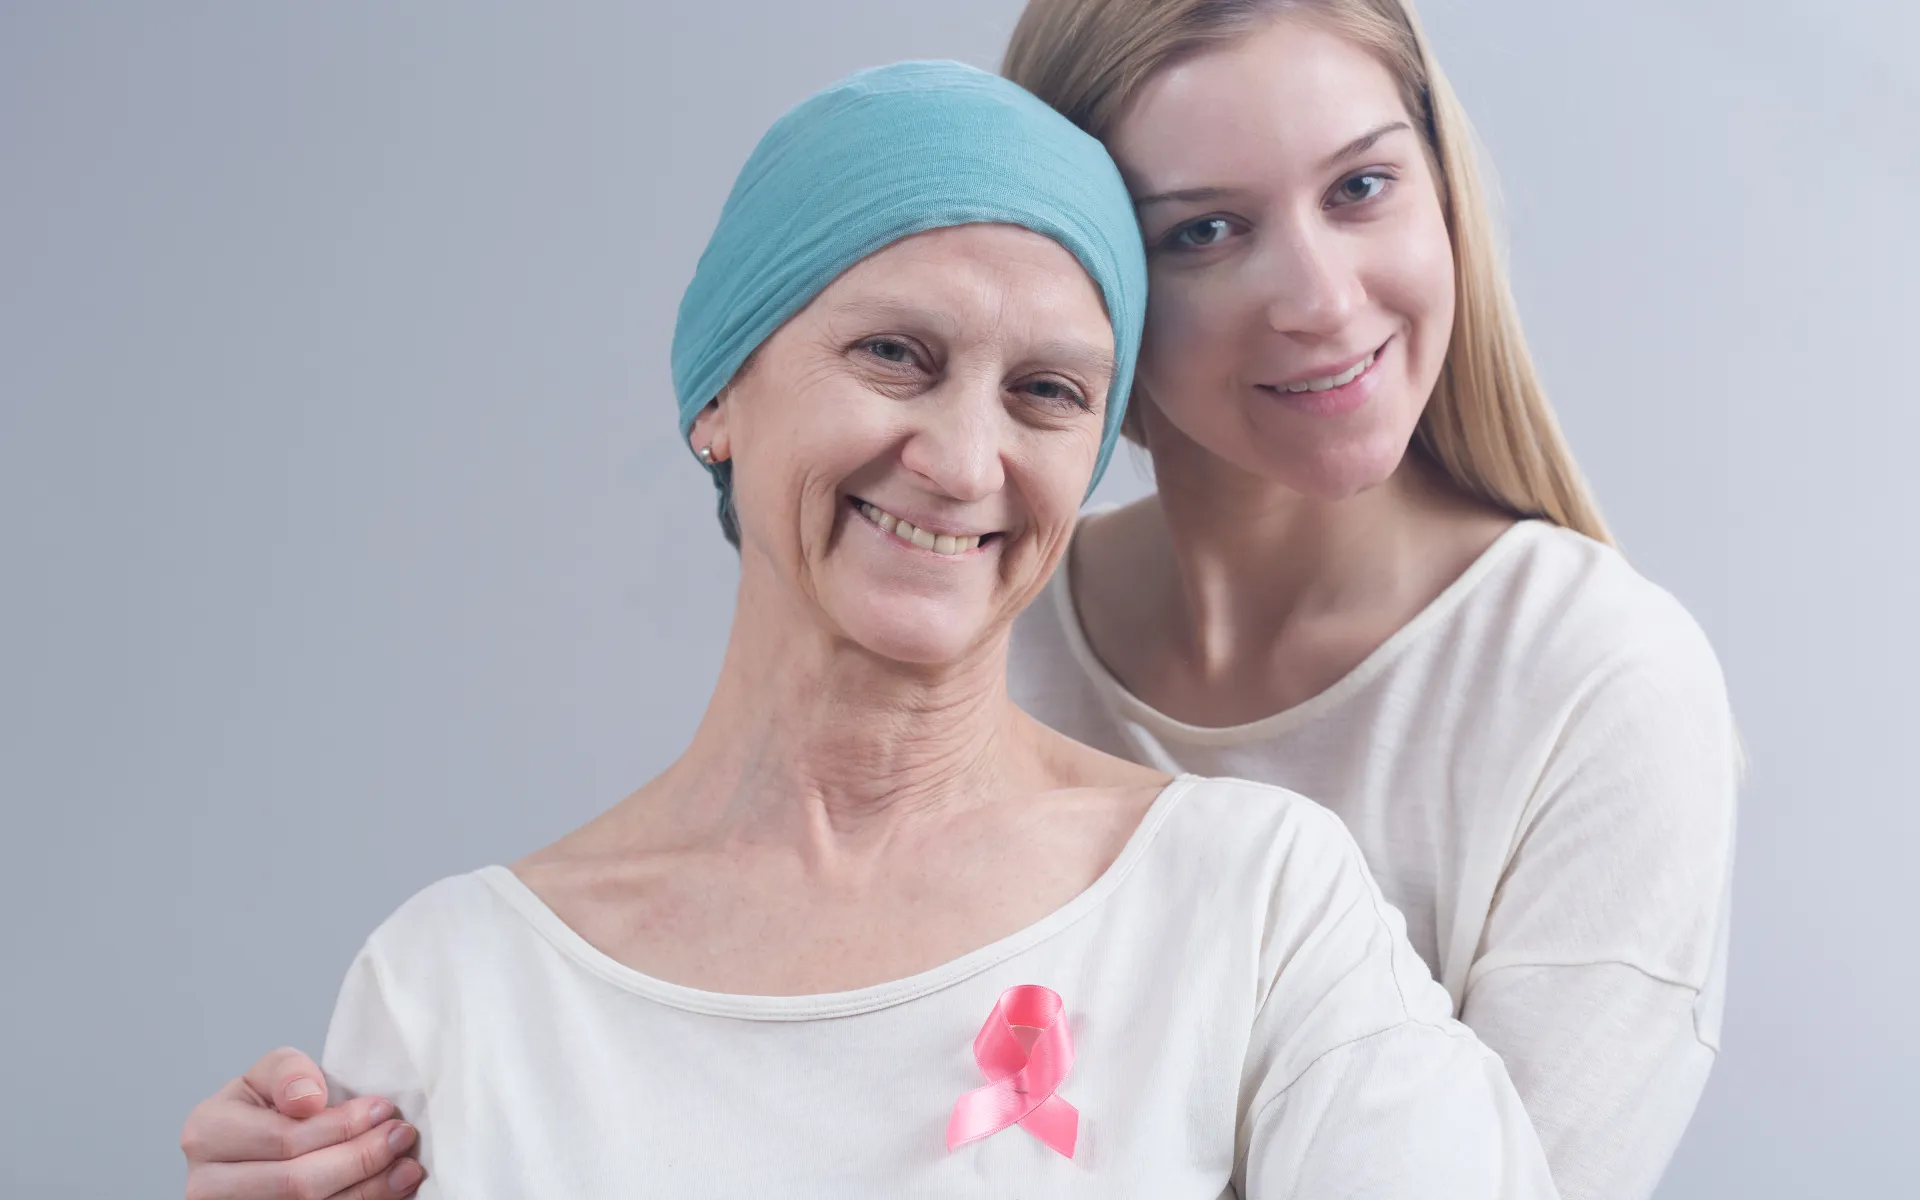 19 Things You Should Never Say to Someone With Cancer